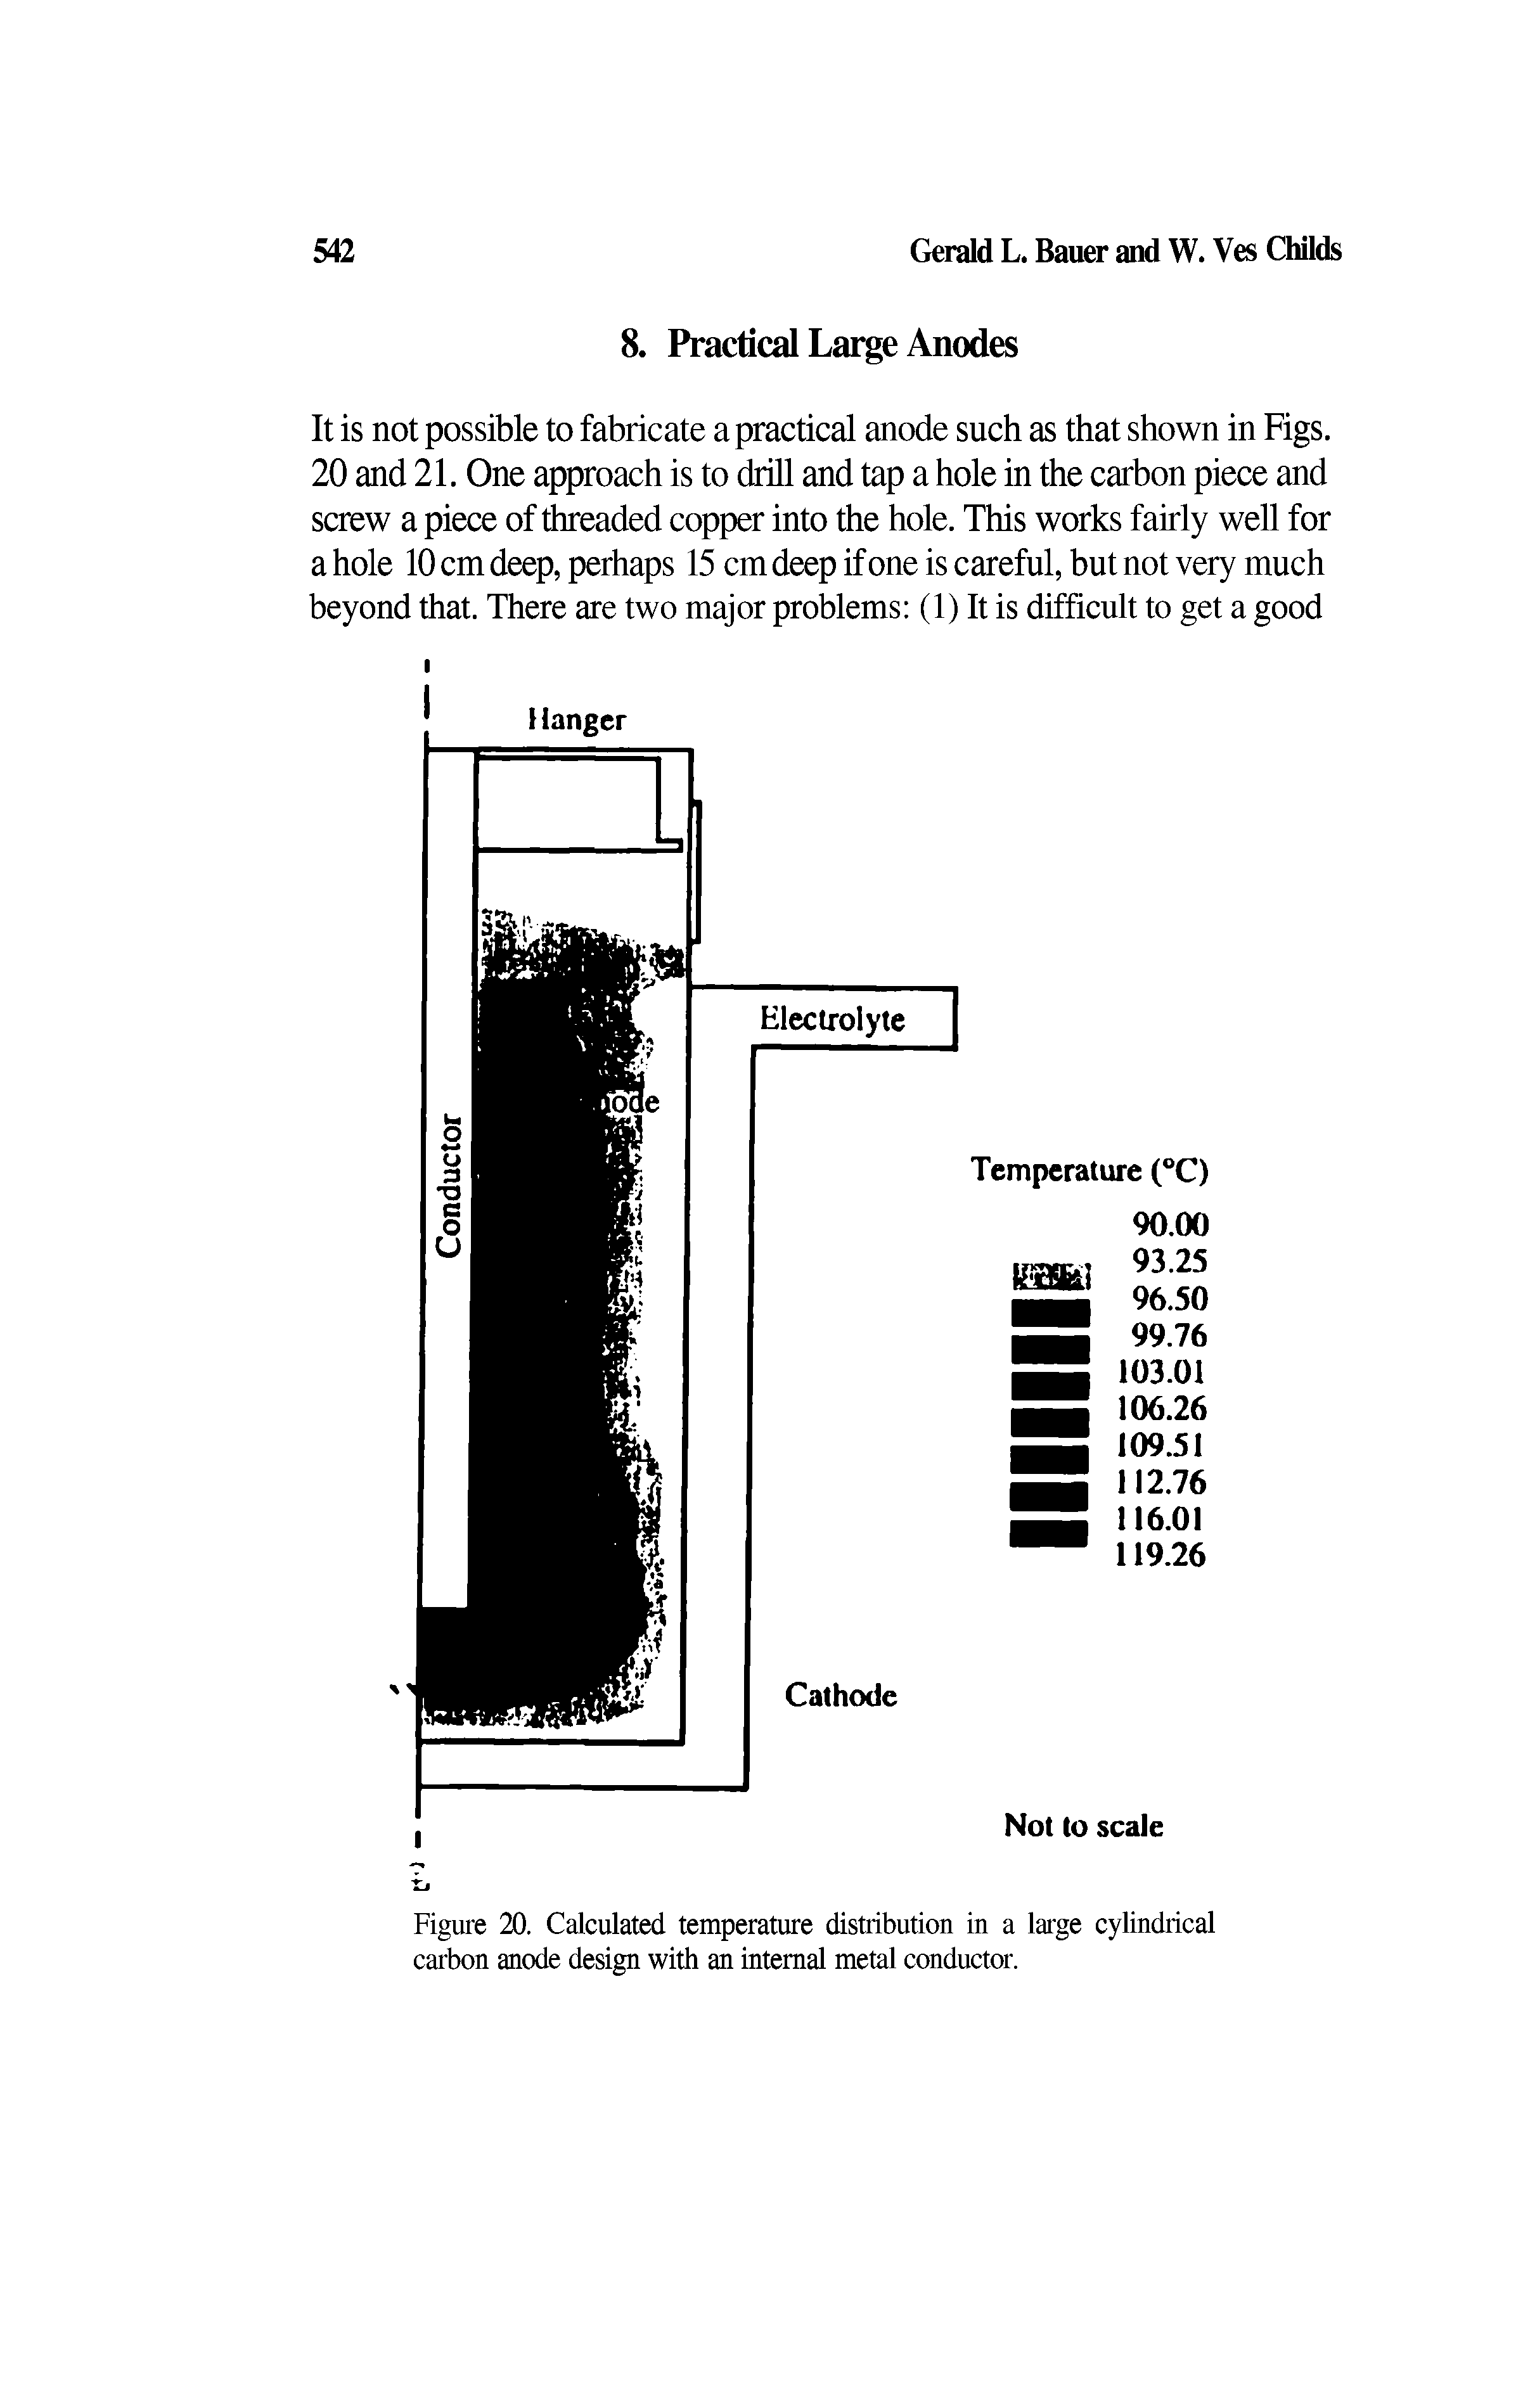 Figure 20. Calculated temperature distribution in a large cylindrical carbon anode design with an internal metal conductor.